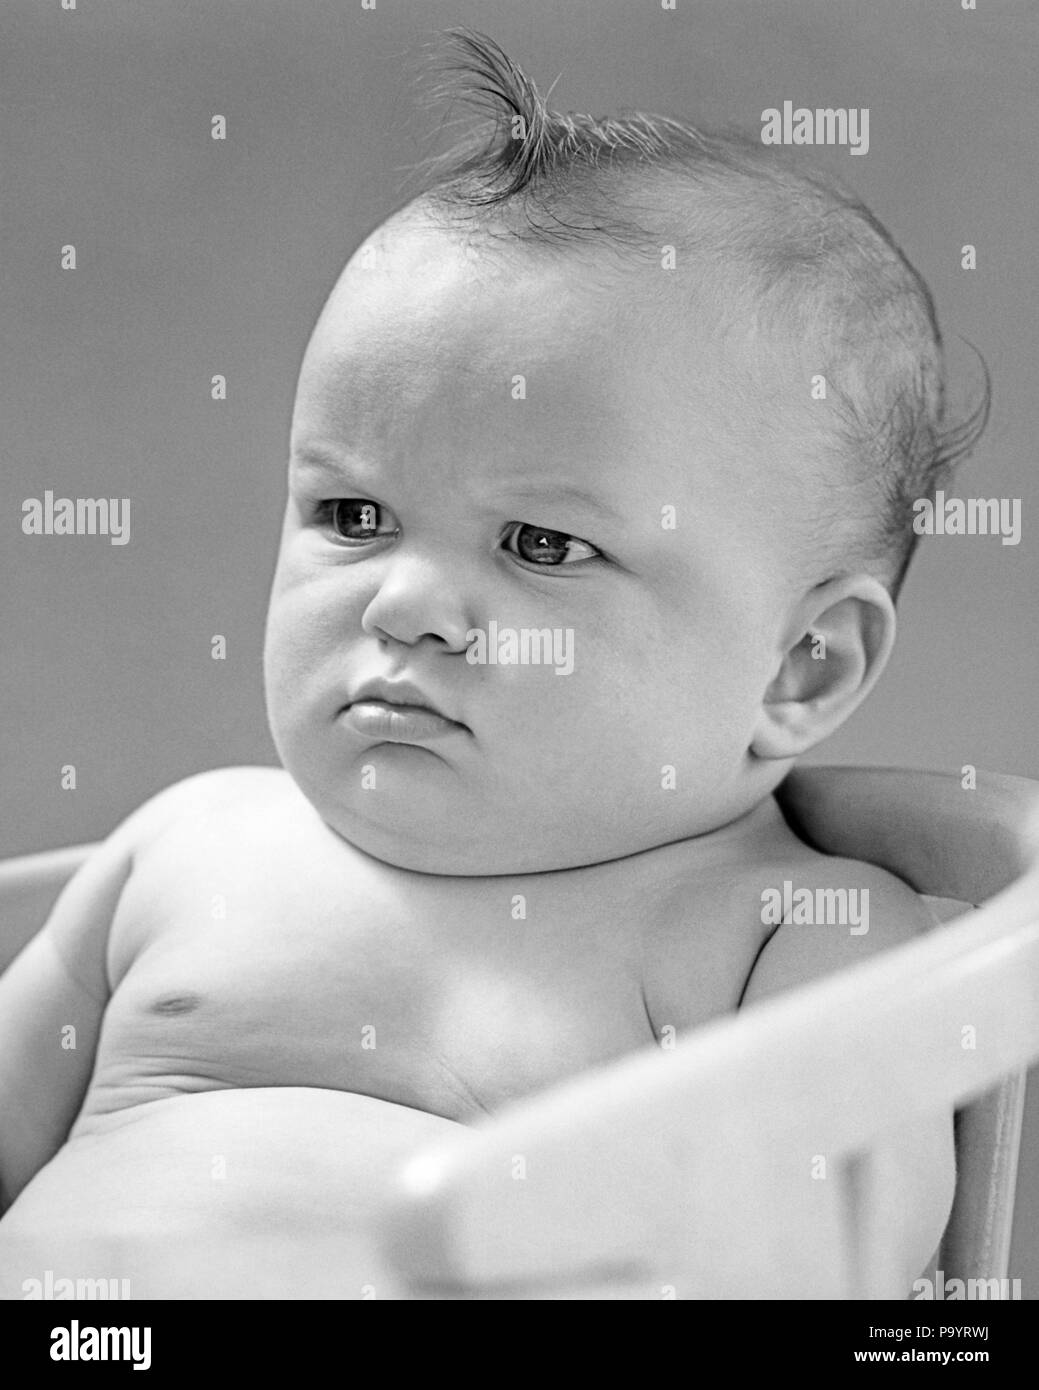 1940s PORTRAIT BABY FROWNING SCOWLING SITTING IN CHAIR - b10902 HAR001 HARS B&W FROWNING SADNESS MEAN ANXIOUS POUTING SCOWLING POUT BABY BOY CRABBY DIRTY LOOK DISGRUNTLED JUVENILES NASTY BLACK AND WHITE CAUCASIAN ETHNICITY DISLIKE HAR001 OLD FASHIONED Stock Photo